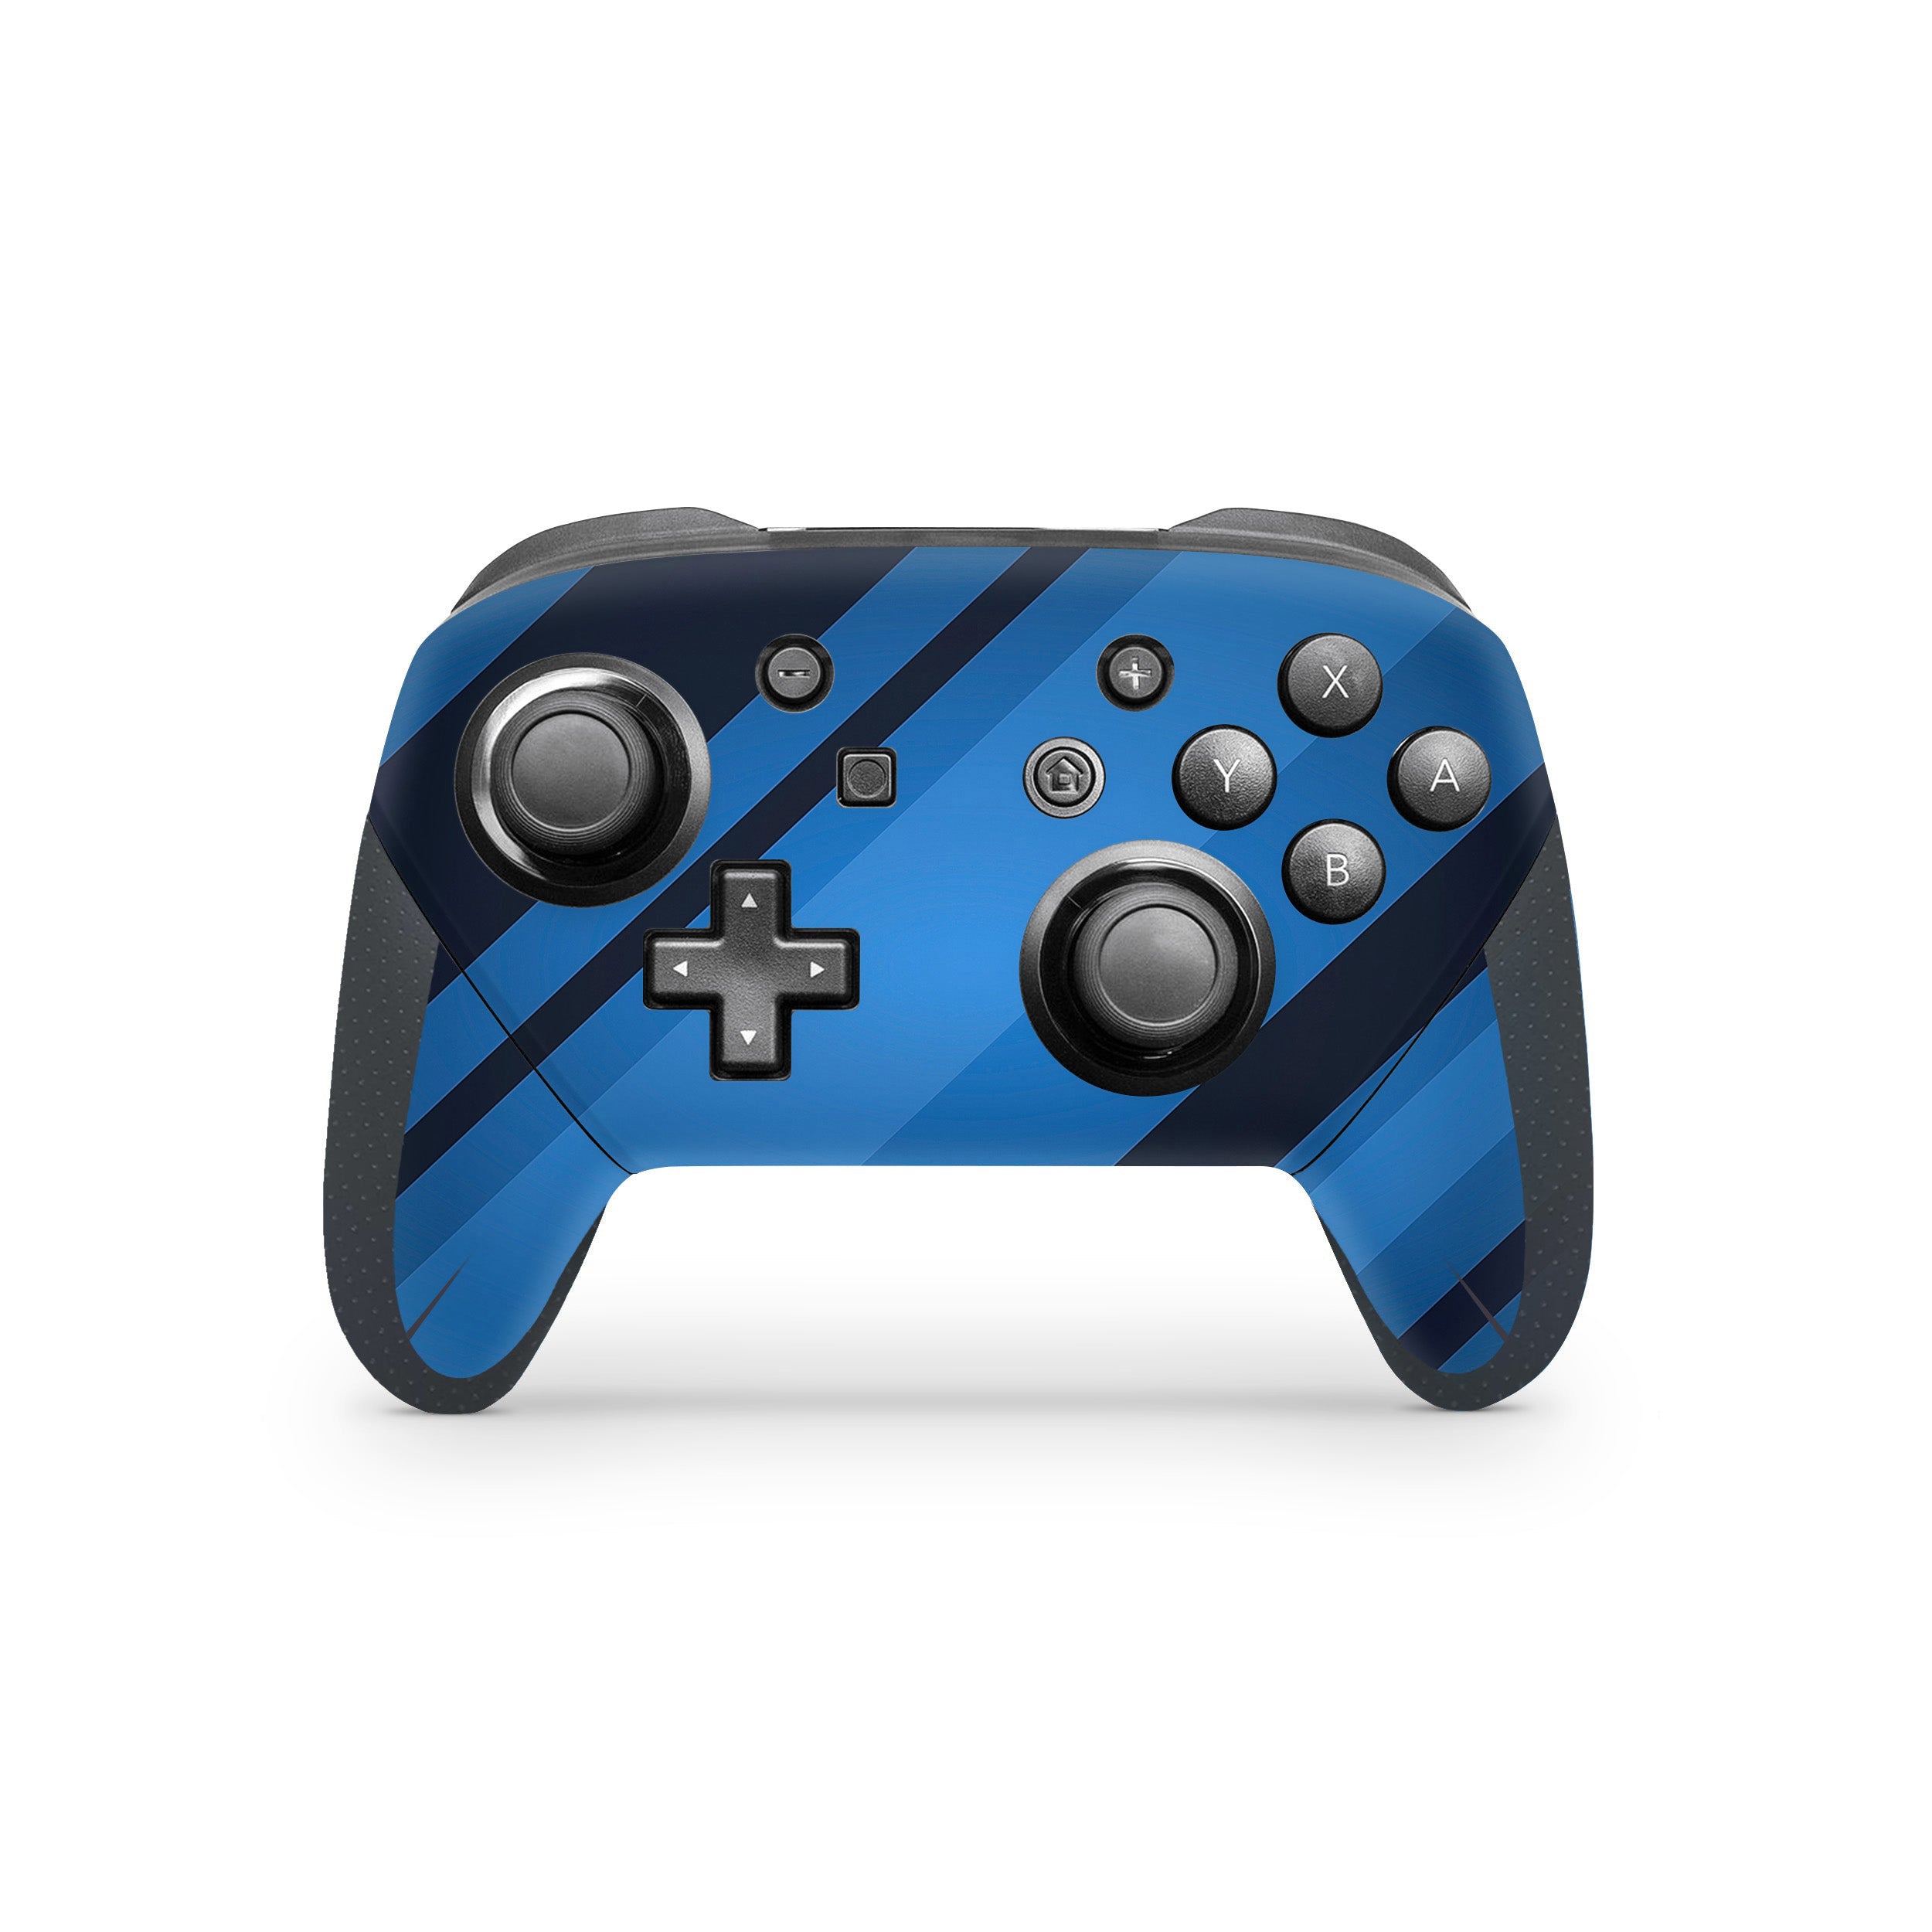 A video game skin featuring a Blue Streaks design for the Switch Pro Controller.